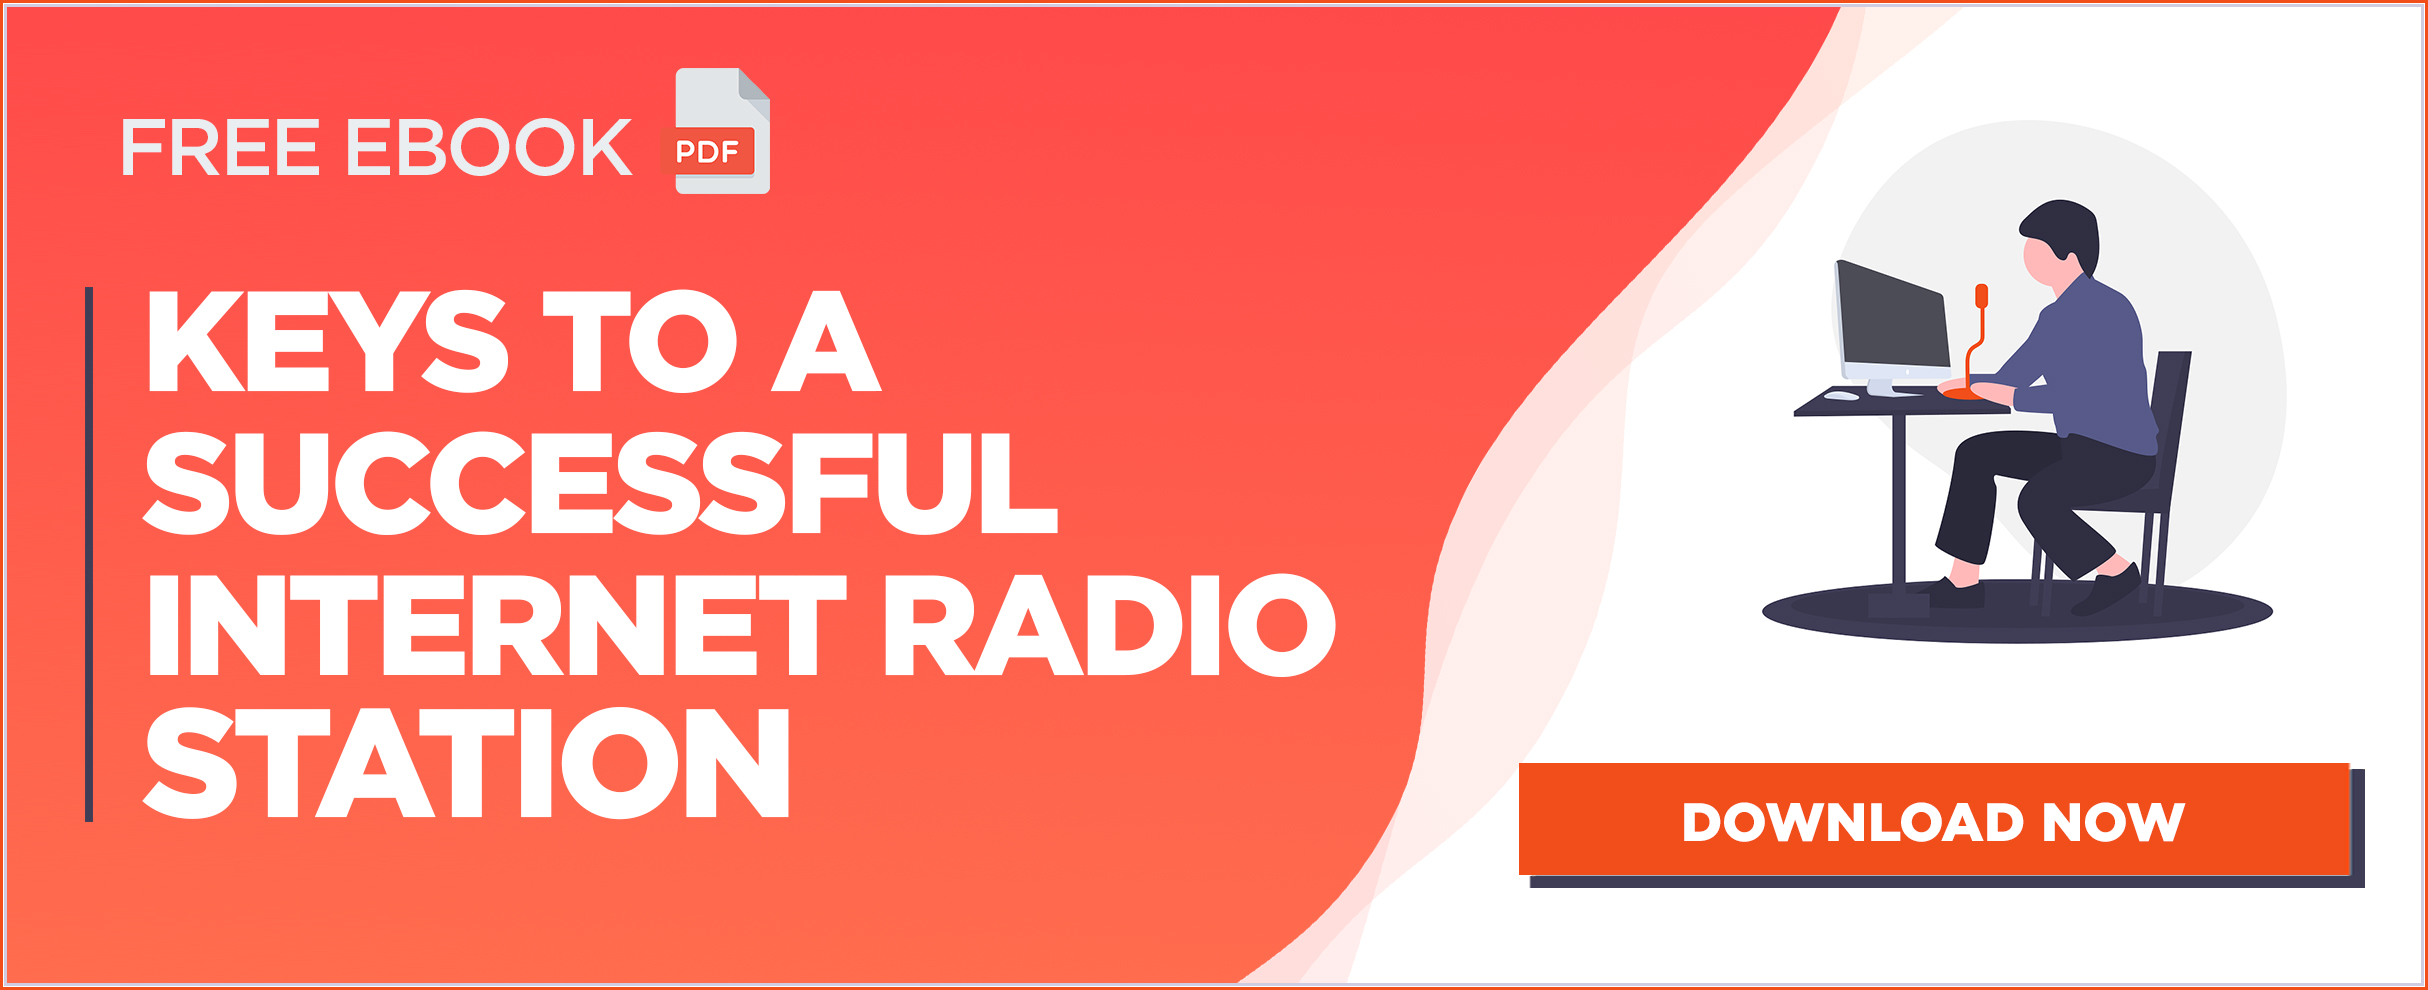 How to broadcast live on your Internet radio station? - RadioKing